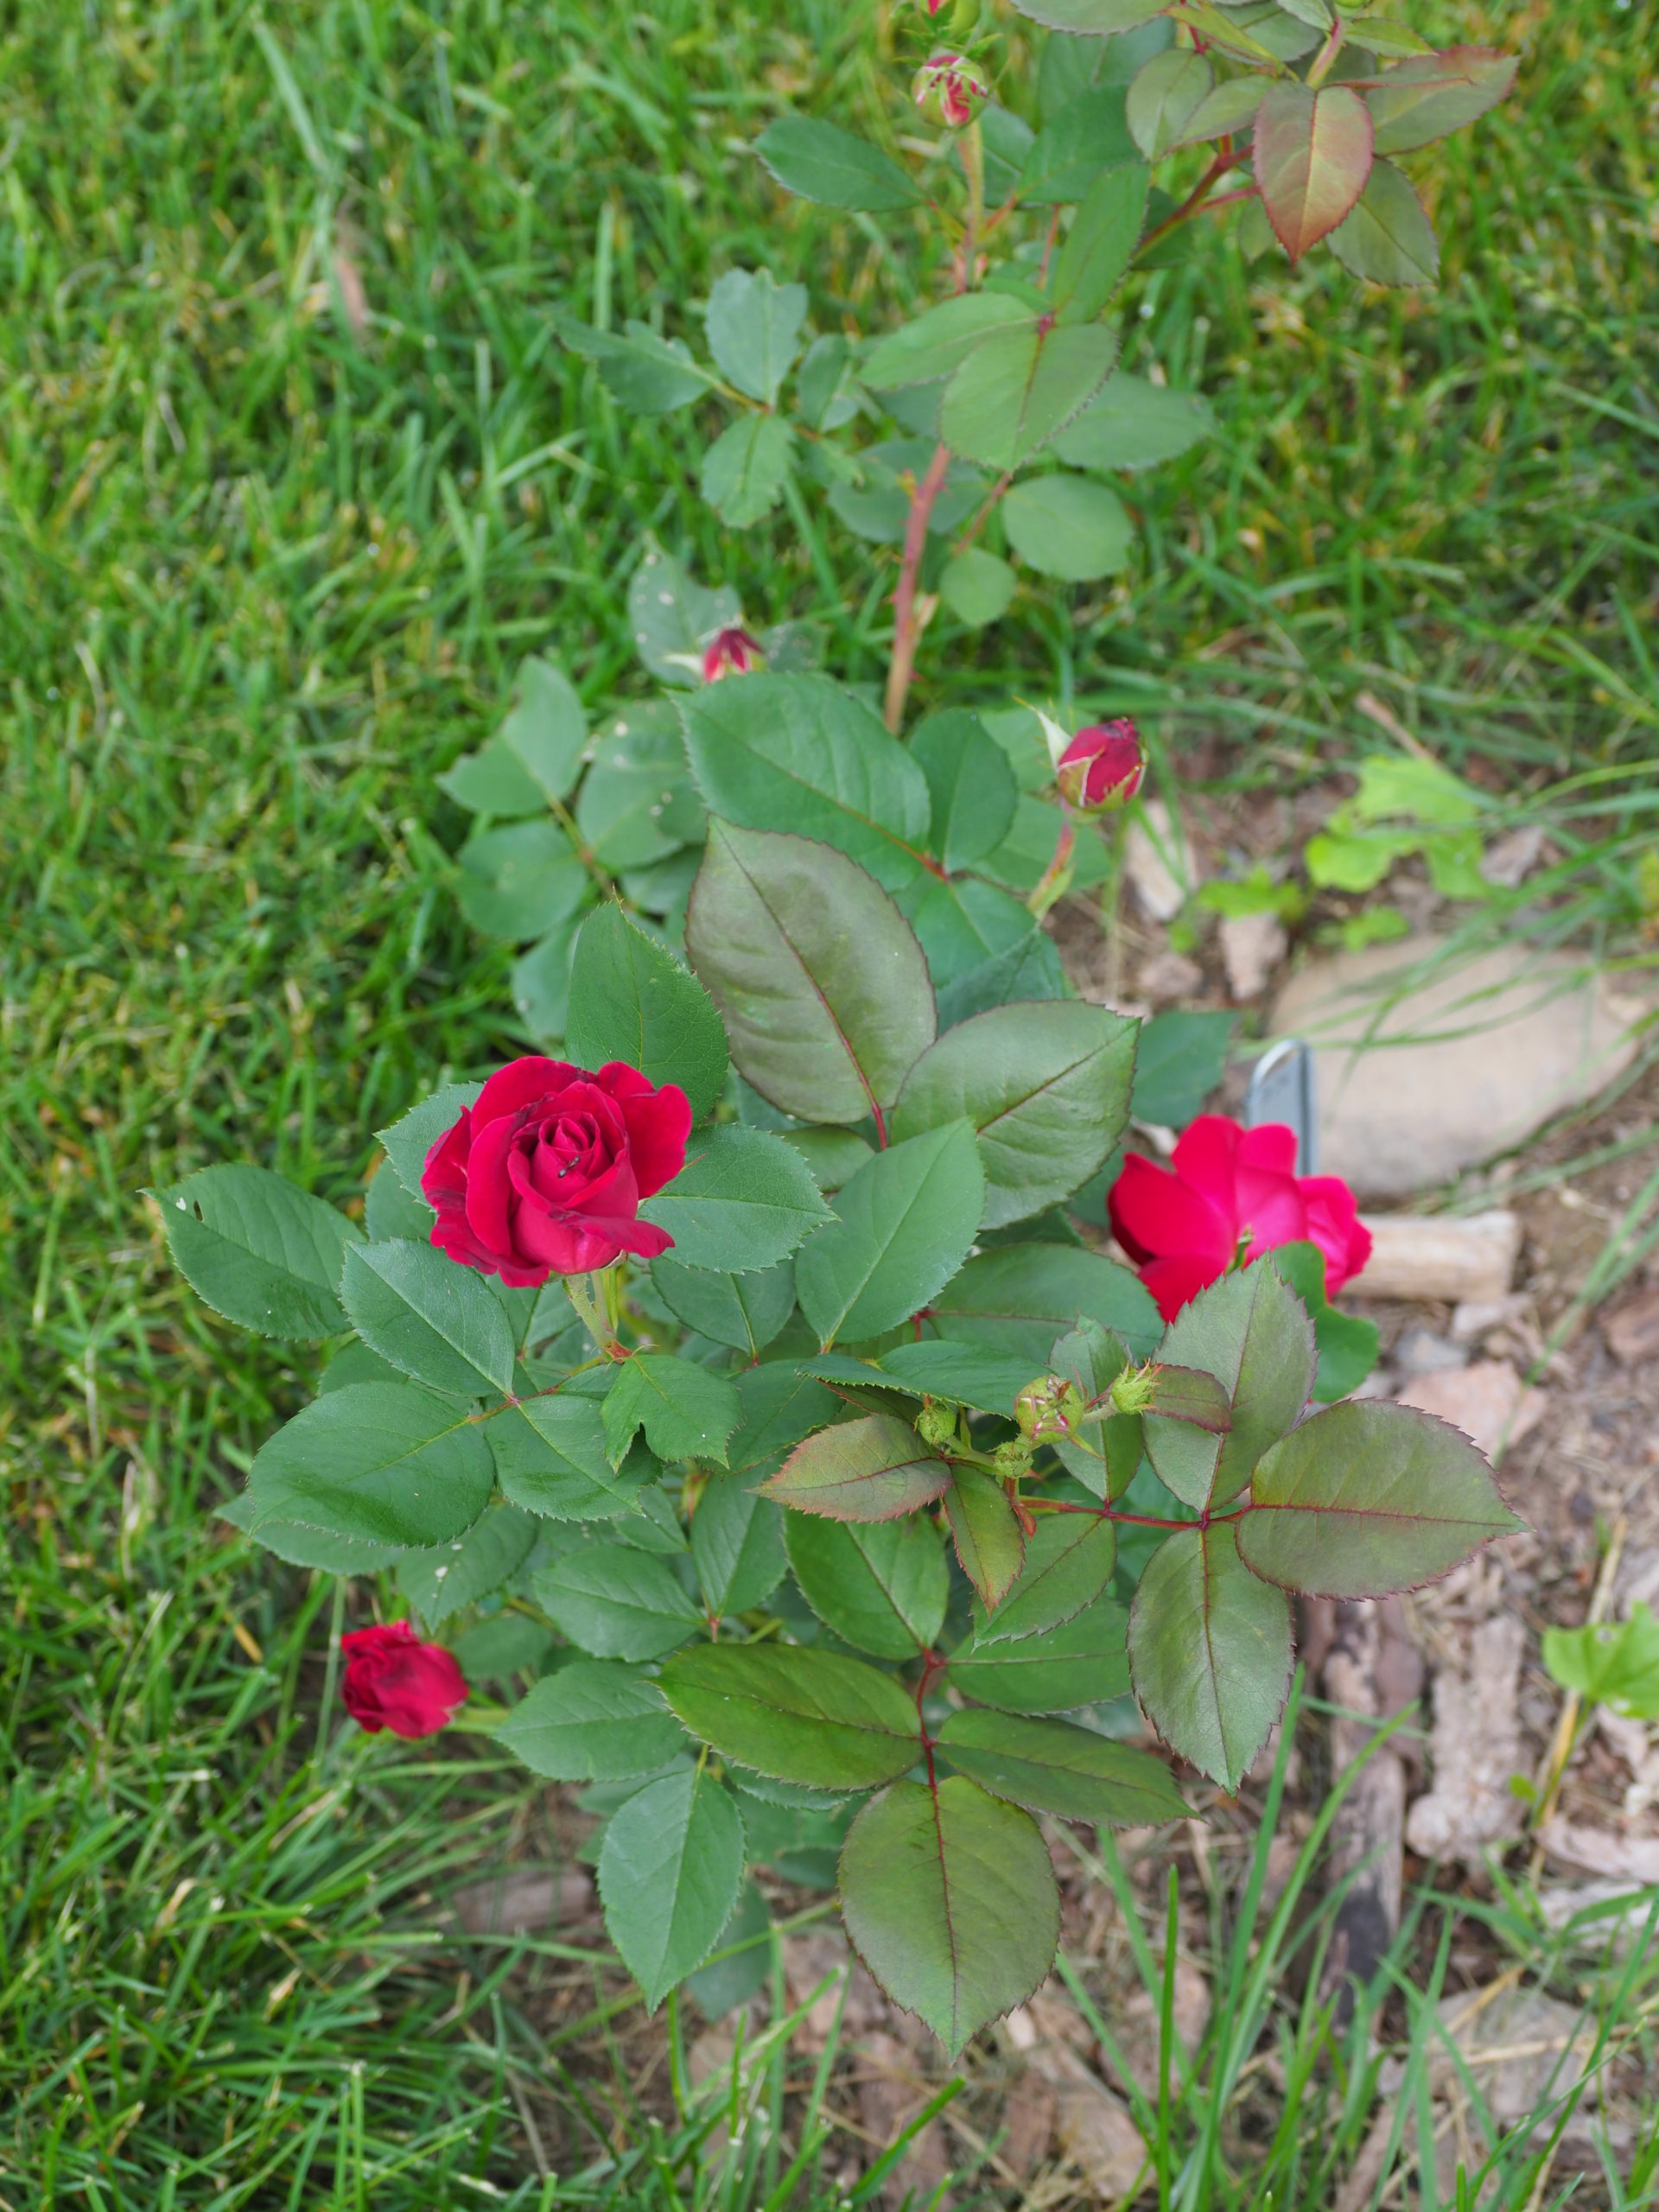 Rose “Sweet Spirit” is a grandiflora-type rose with a more typical rose scent. This rose has become very popular since its introduction only a few years ago and has won several awards in trials. This plant is now blooming after only being planted six weeks ago as a bare-root plant.